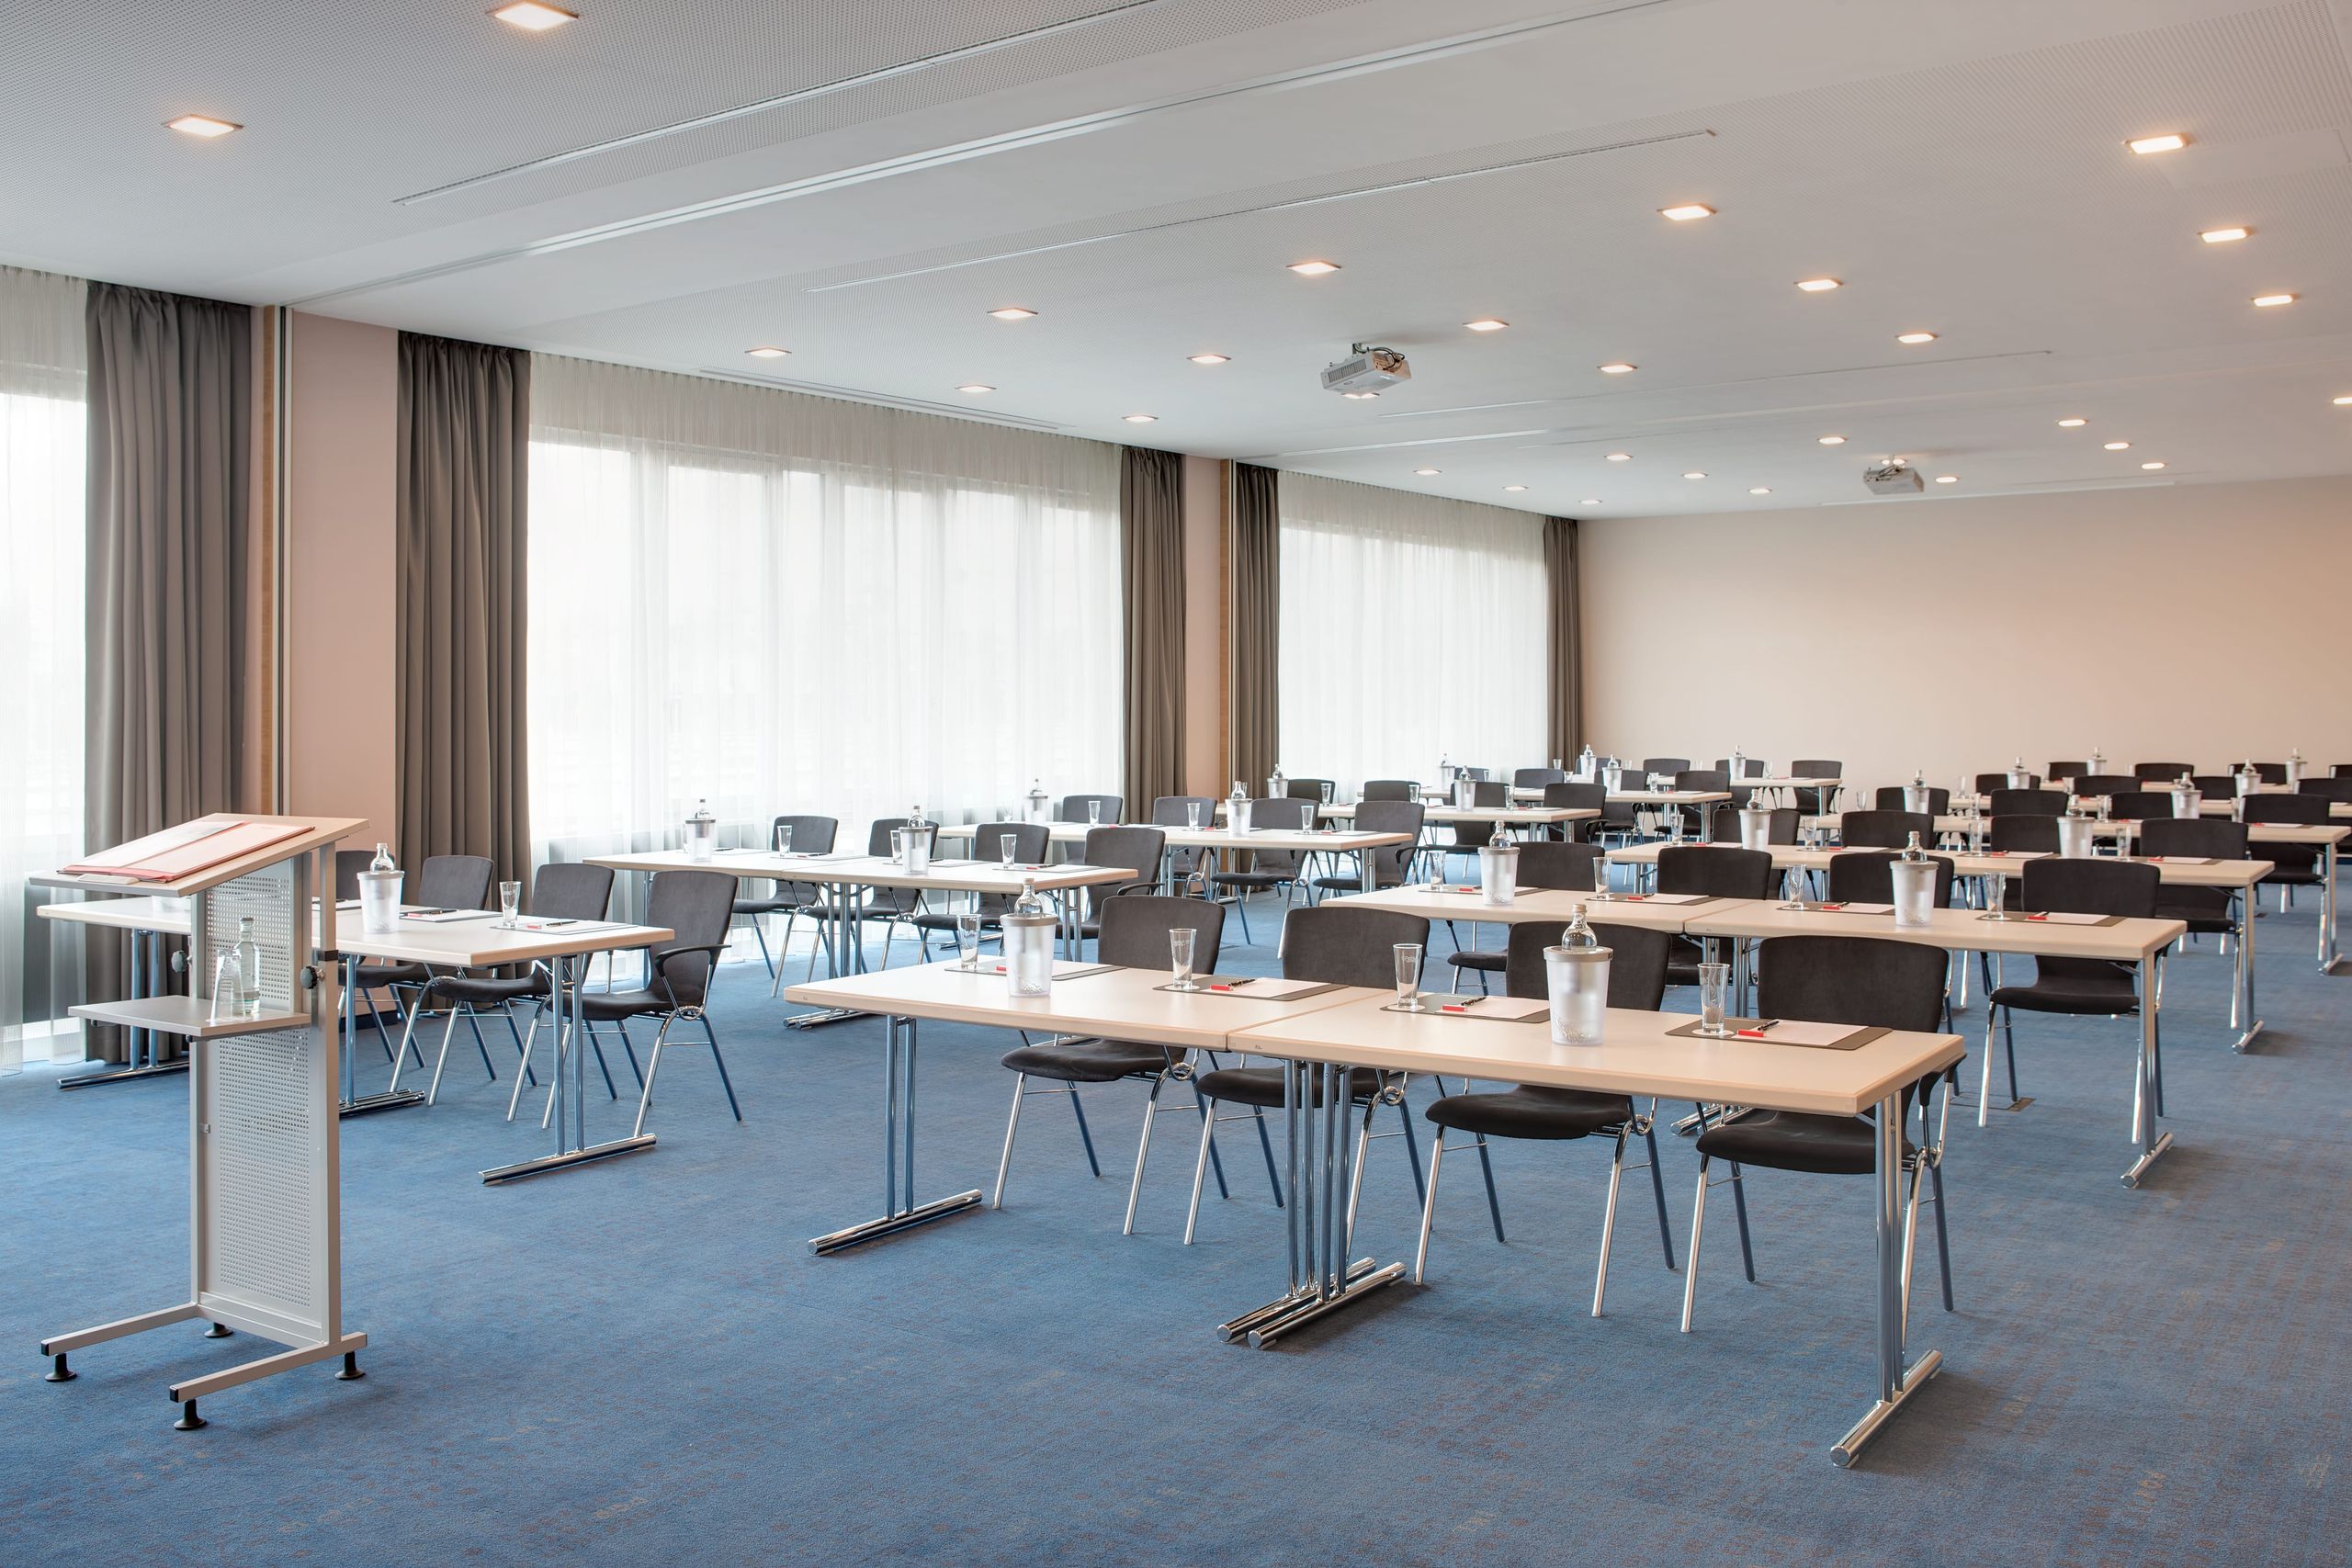 IntercityHotel Darmstadt – meetings, conference room, events